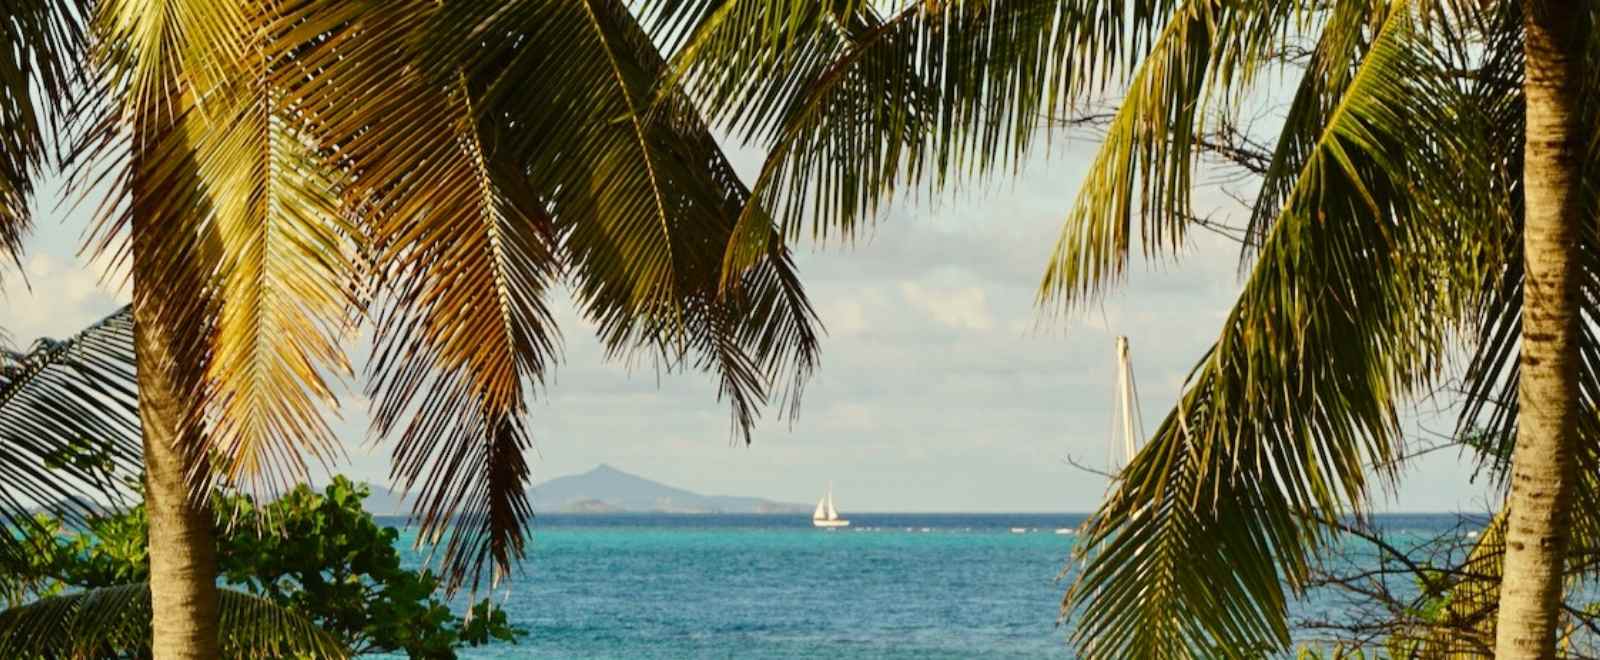 a view of the ocean with palm trees and a sailboat in the distance.